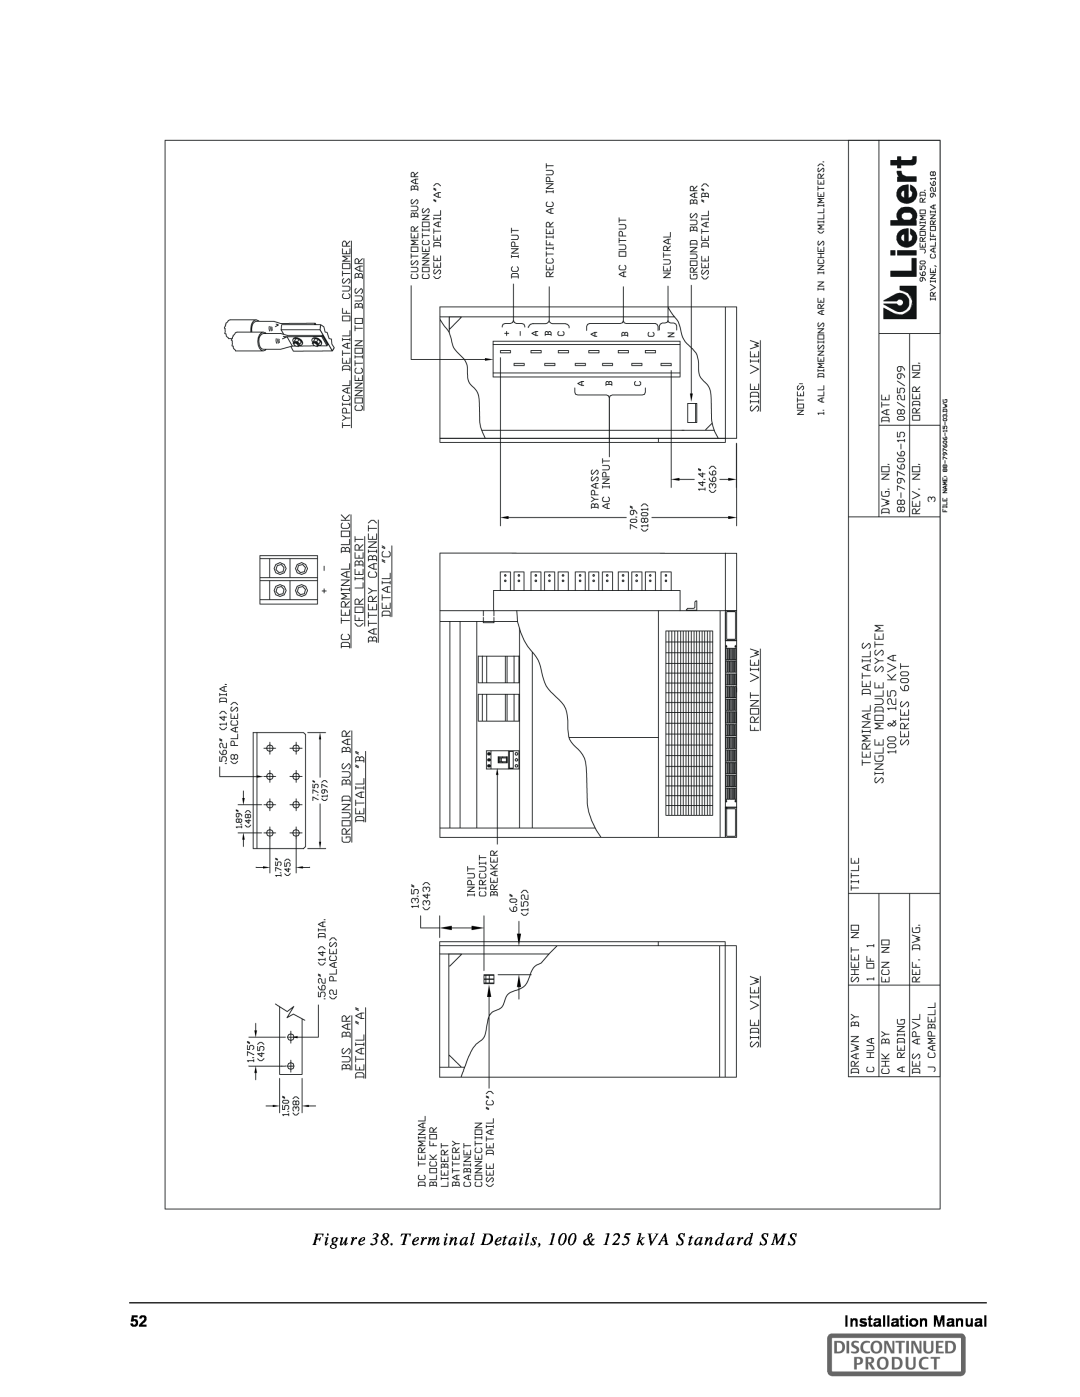 Emerson SERIES 600T manual Terminal Details, 100 & 125 kVA Standard SMS, Discontinued Product 